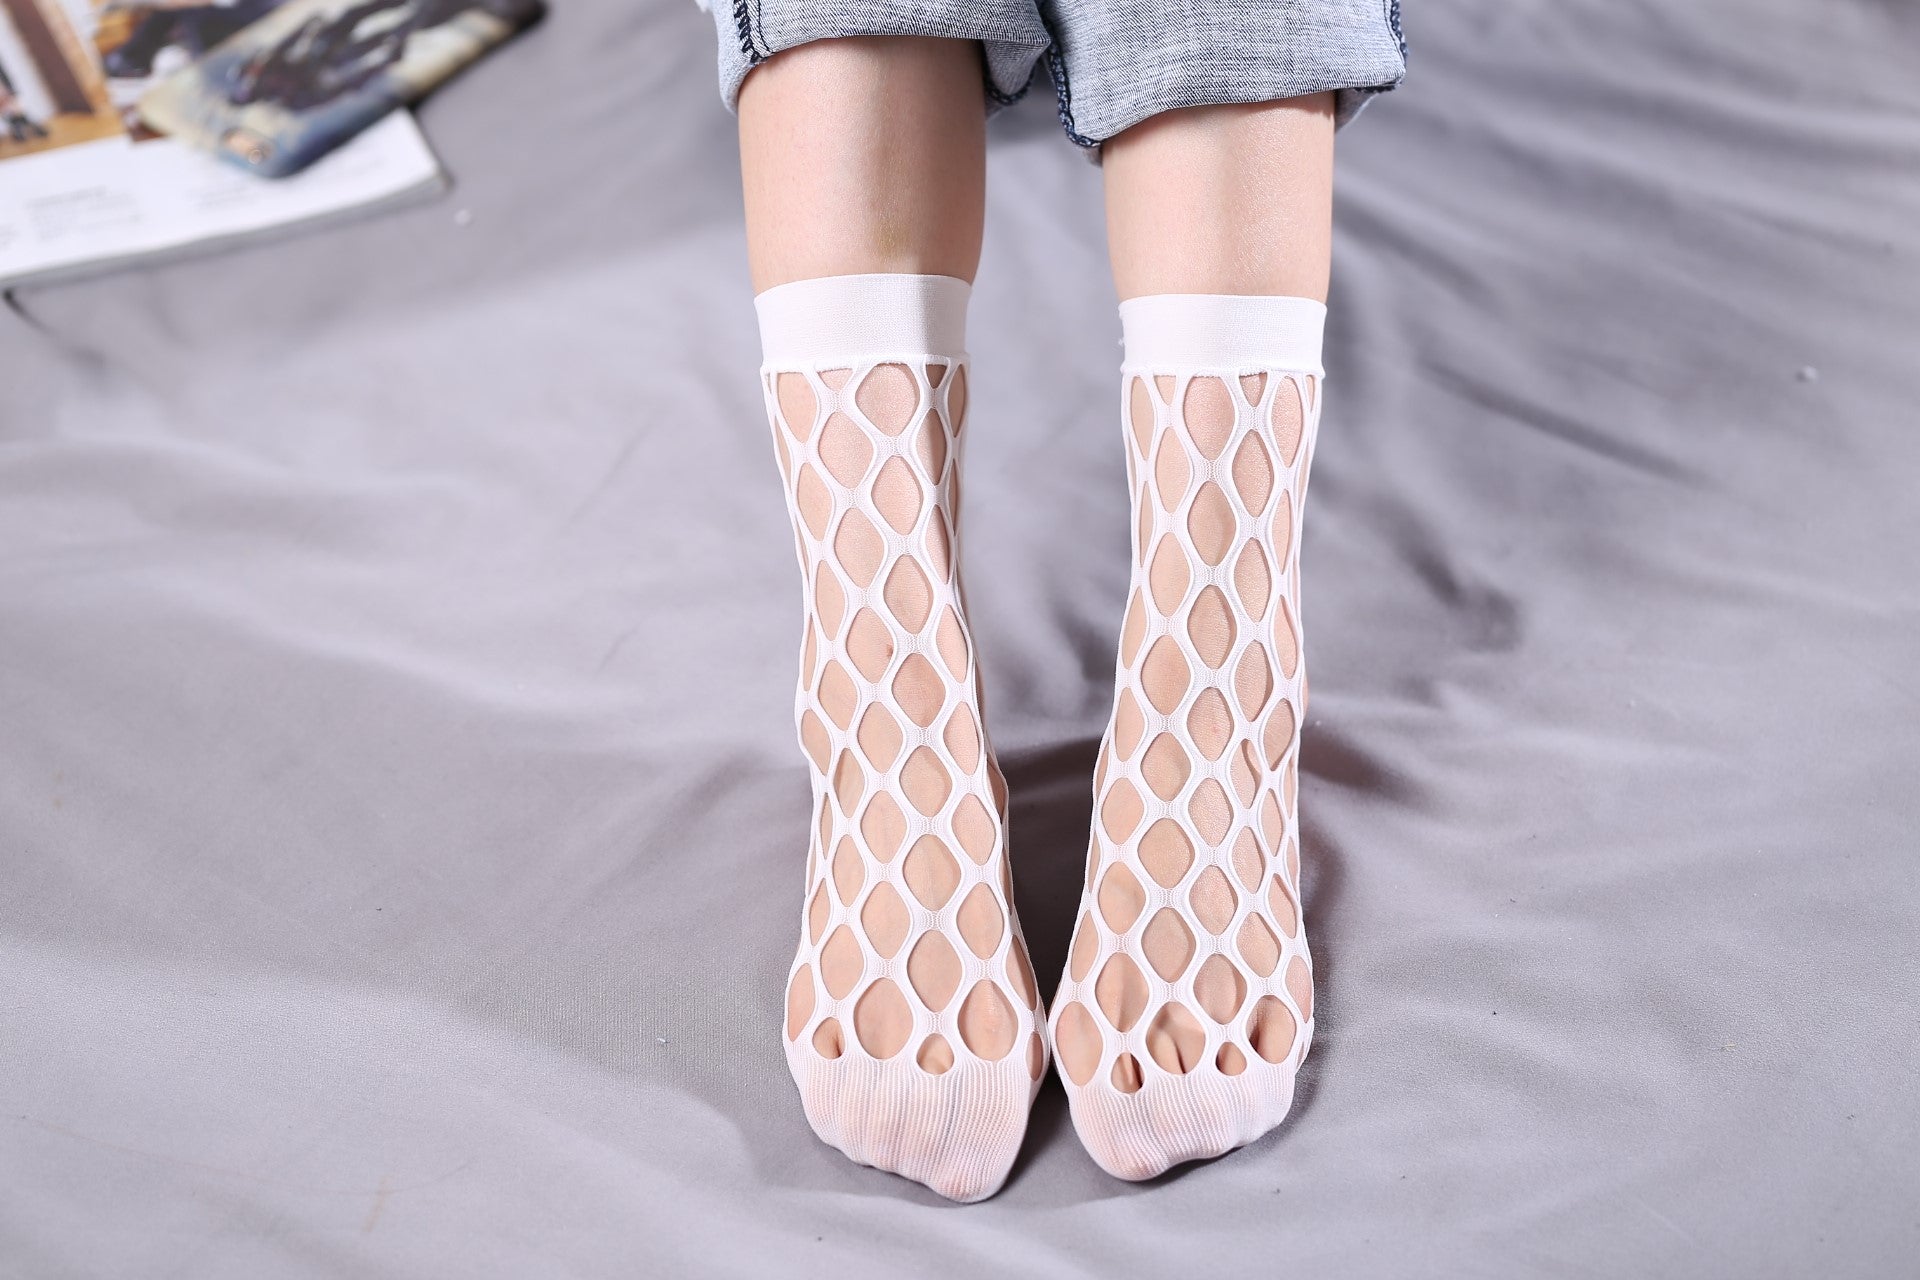 Ankle High Stockings D-2523-White